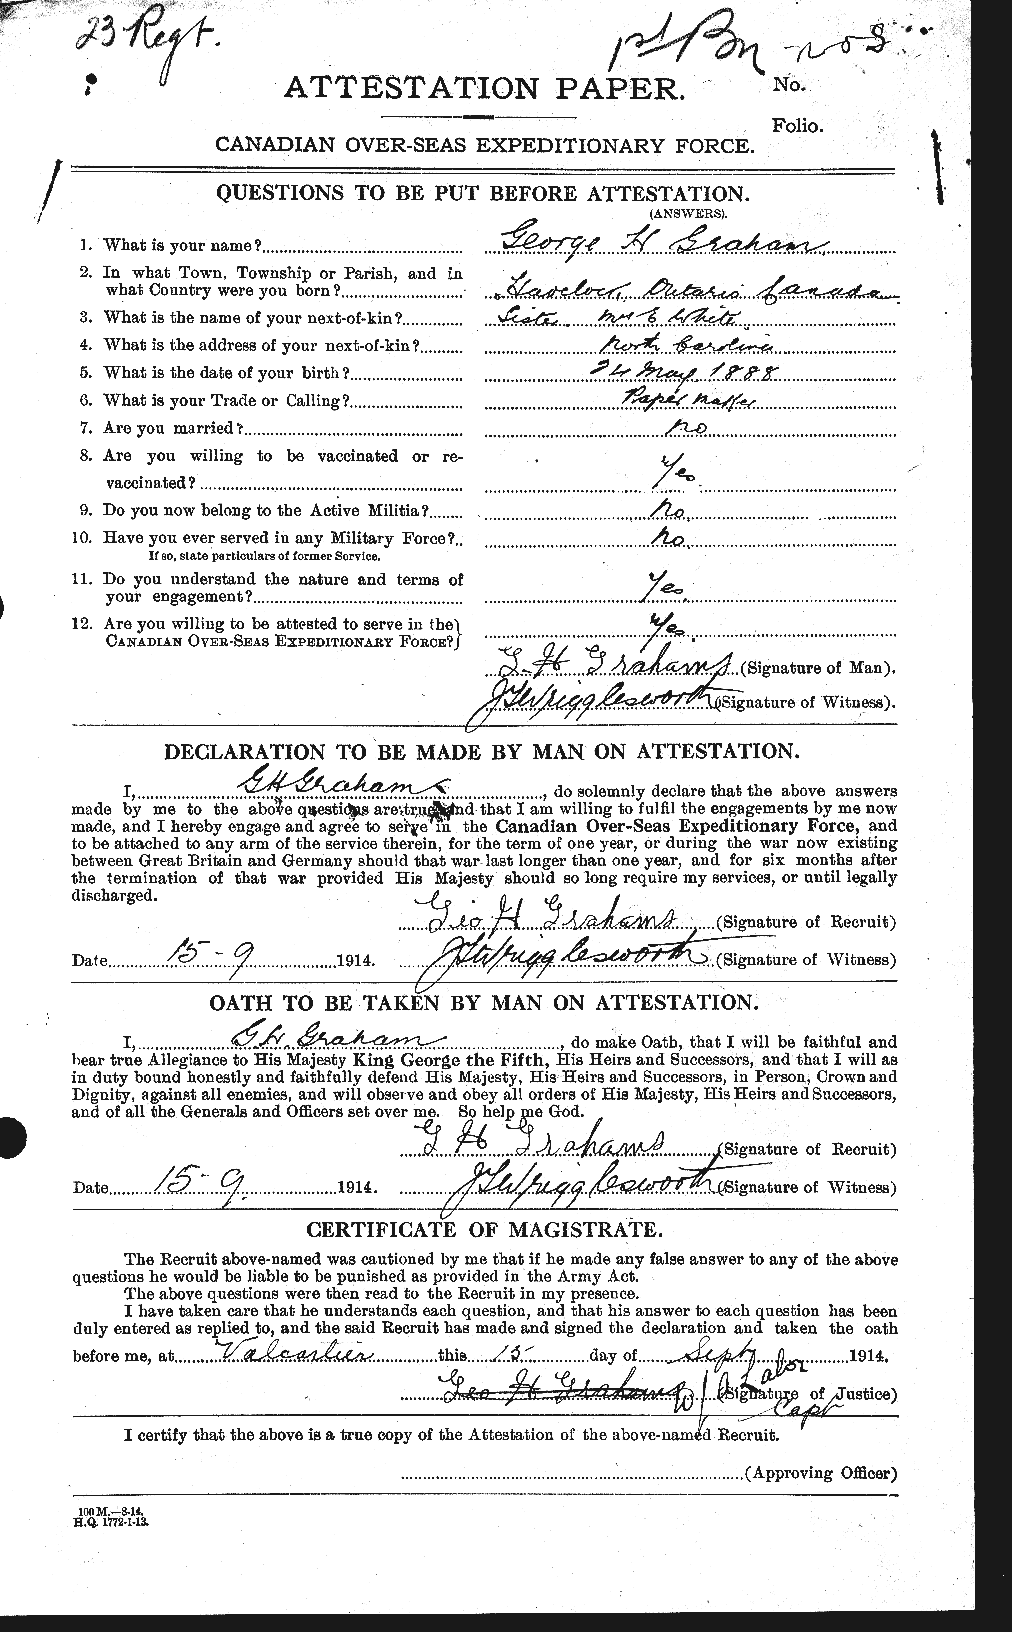 Personnel Records of the First World War - CEF 357658a